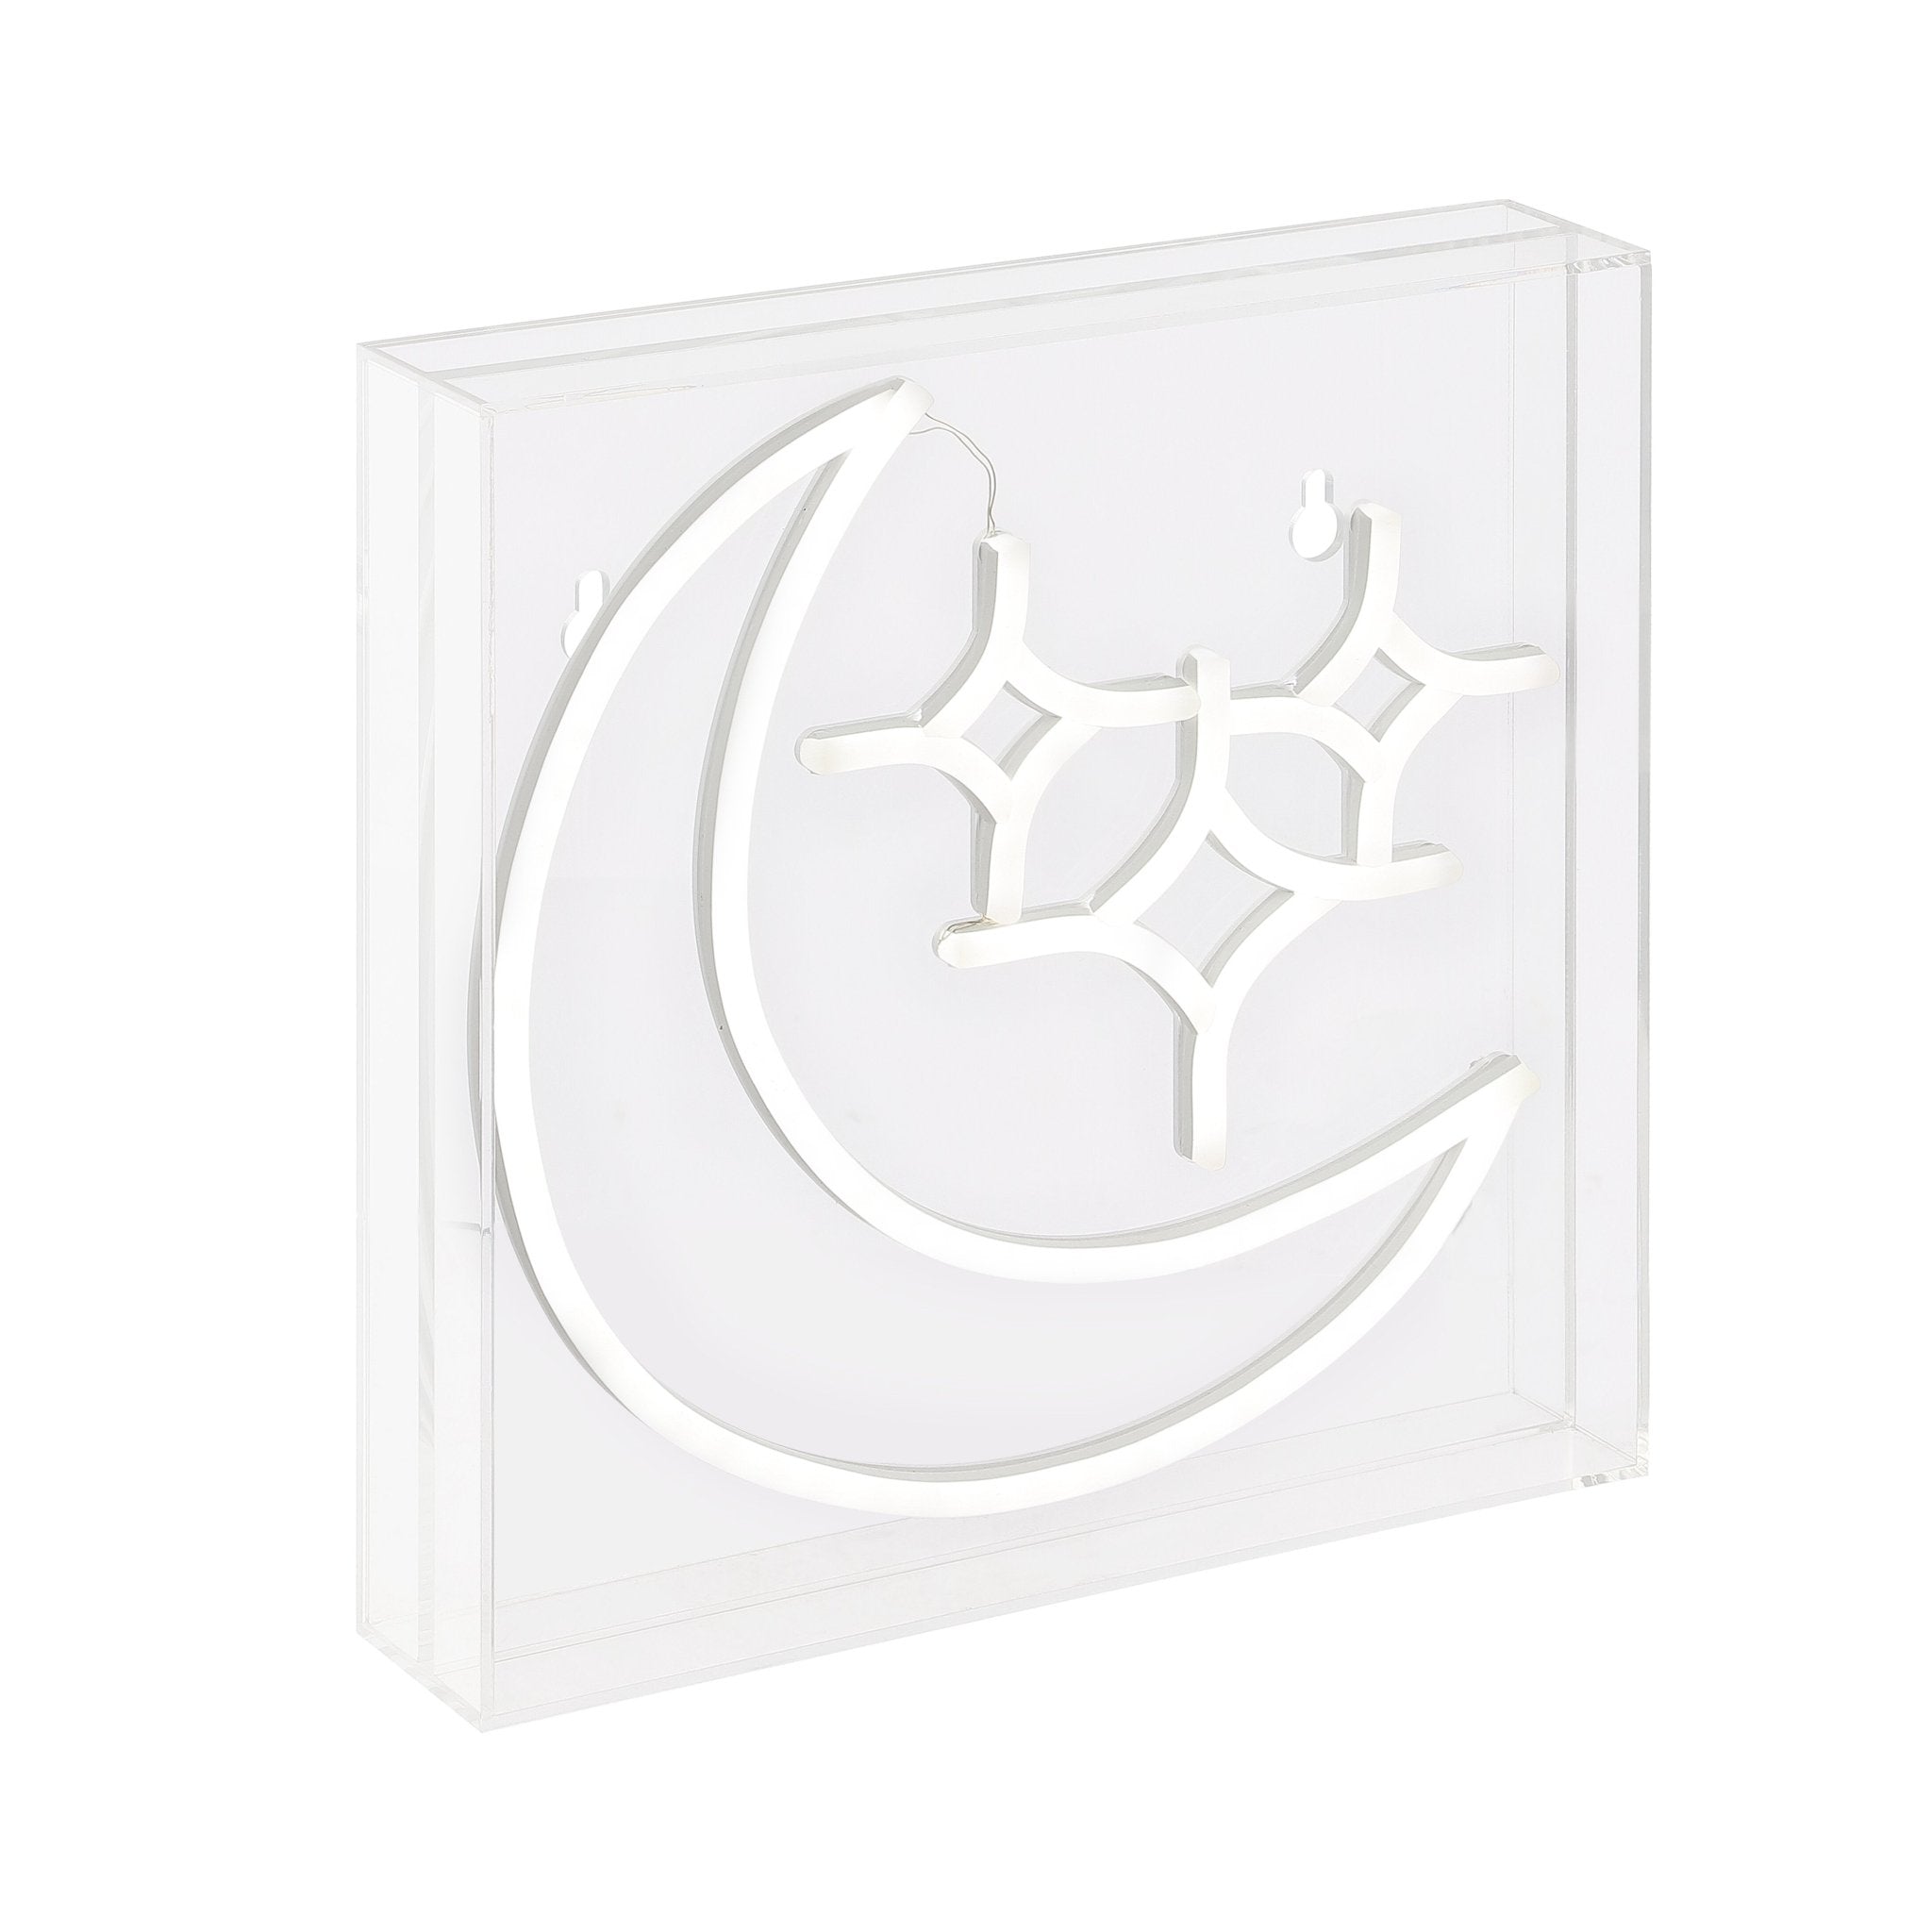 Starry Crescent Square Contemporary Glam Acrylic Box USB Operated LED Neon Light - Decorative Lighting